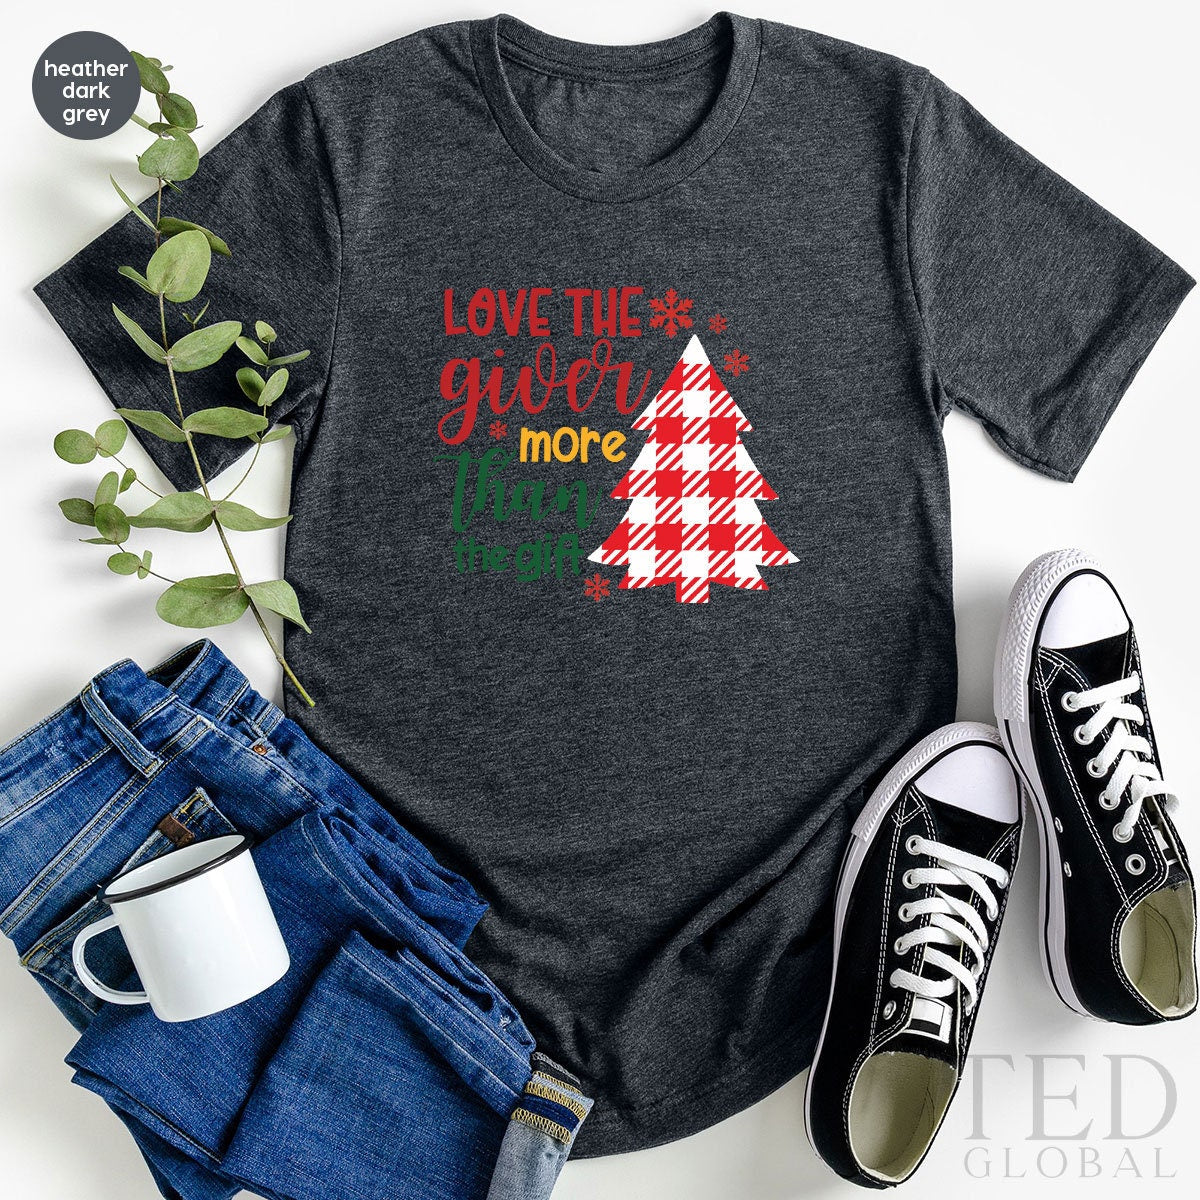 Cute Official Cookie Taster T-Shirt, Funny Baking Shirts, Christmas Ba –